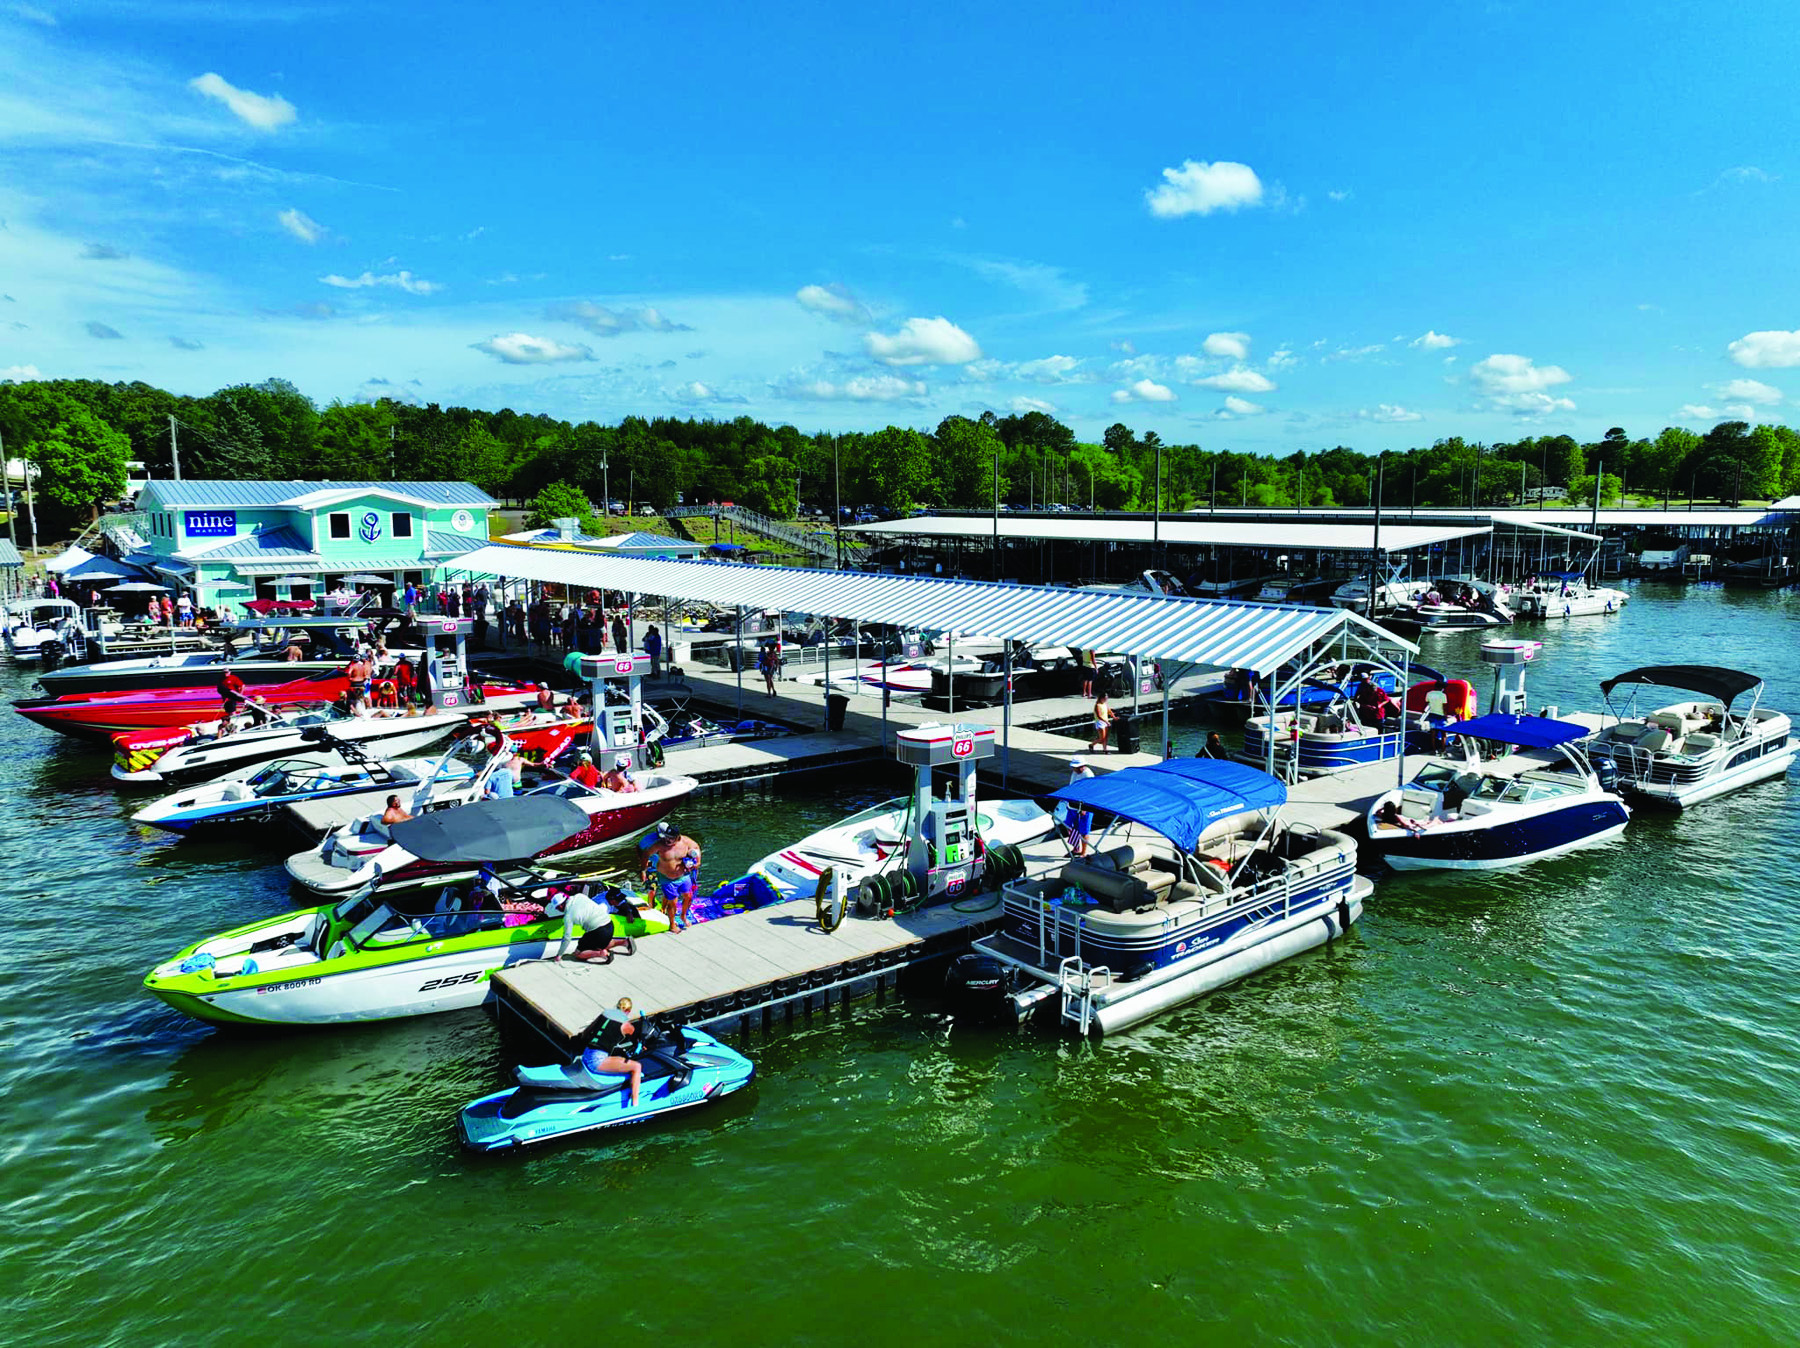 The lake was buzzing with all of the boaters who were vying for the big